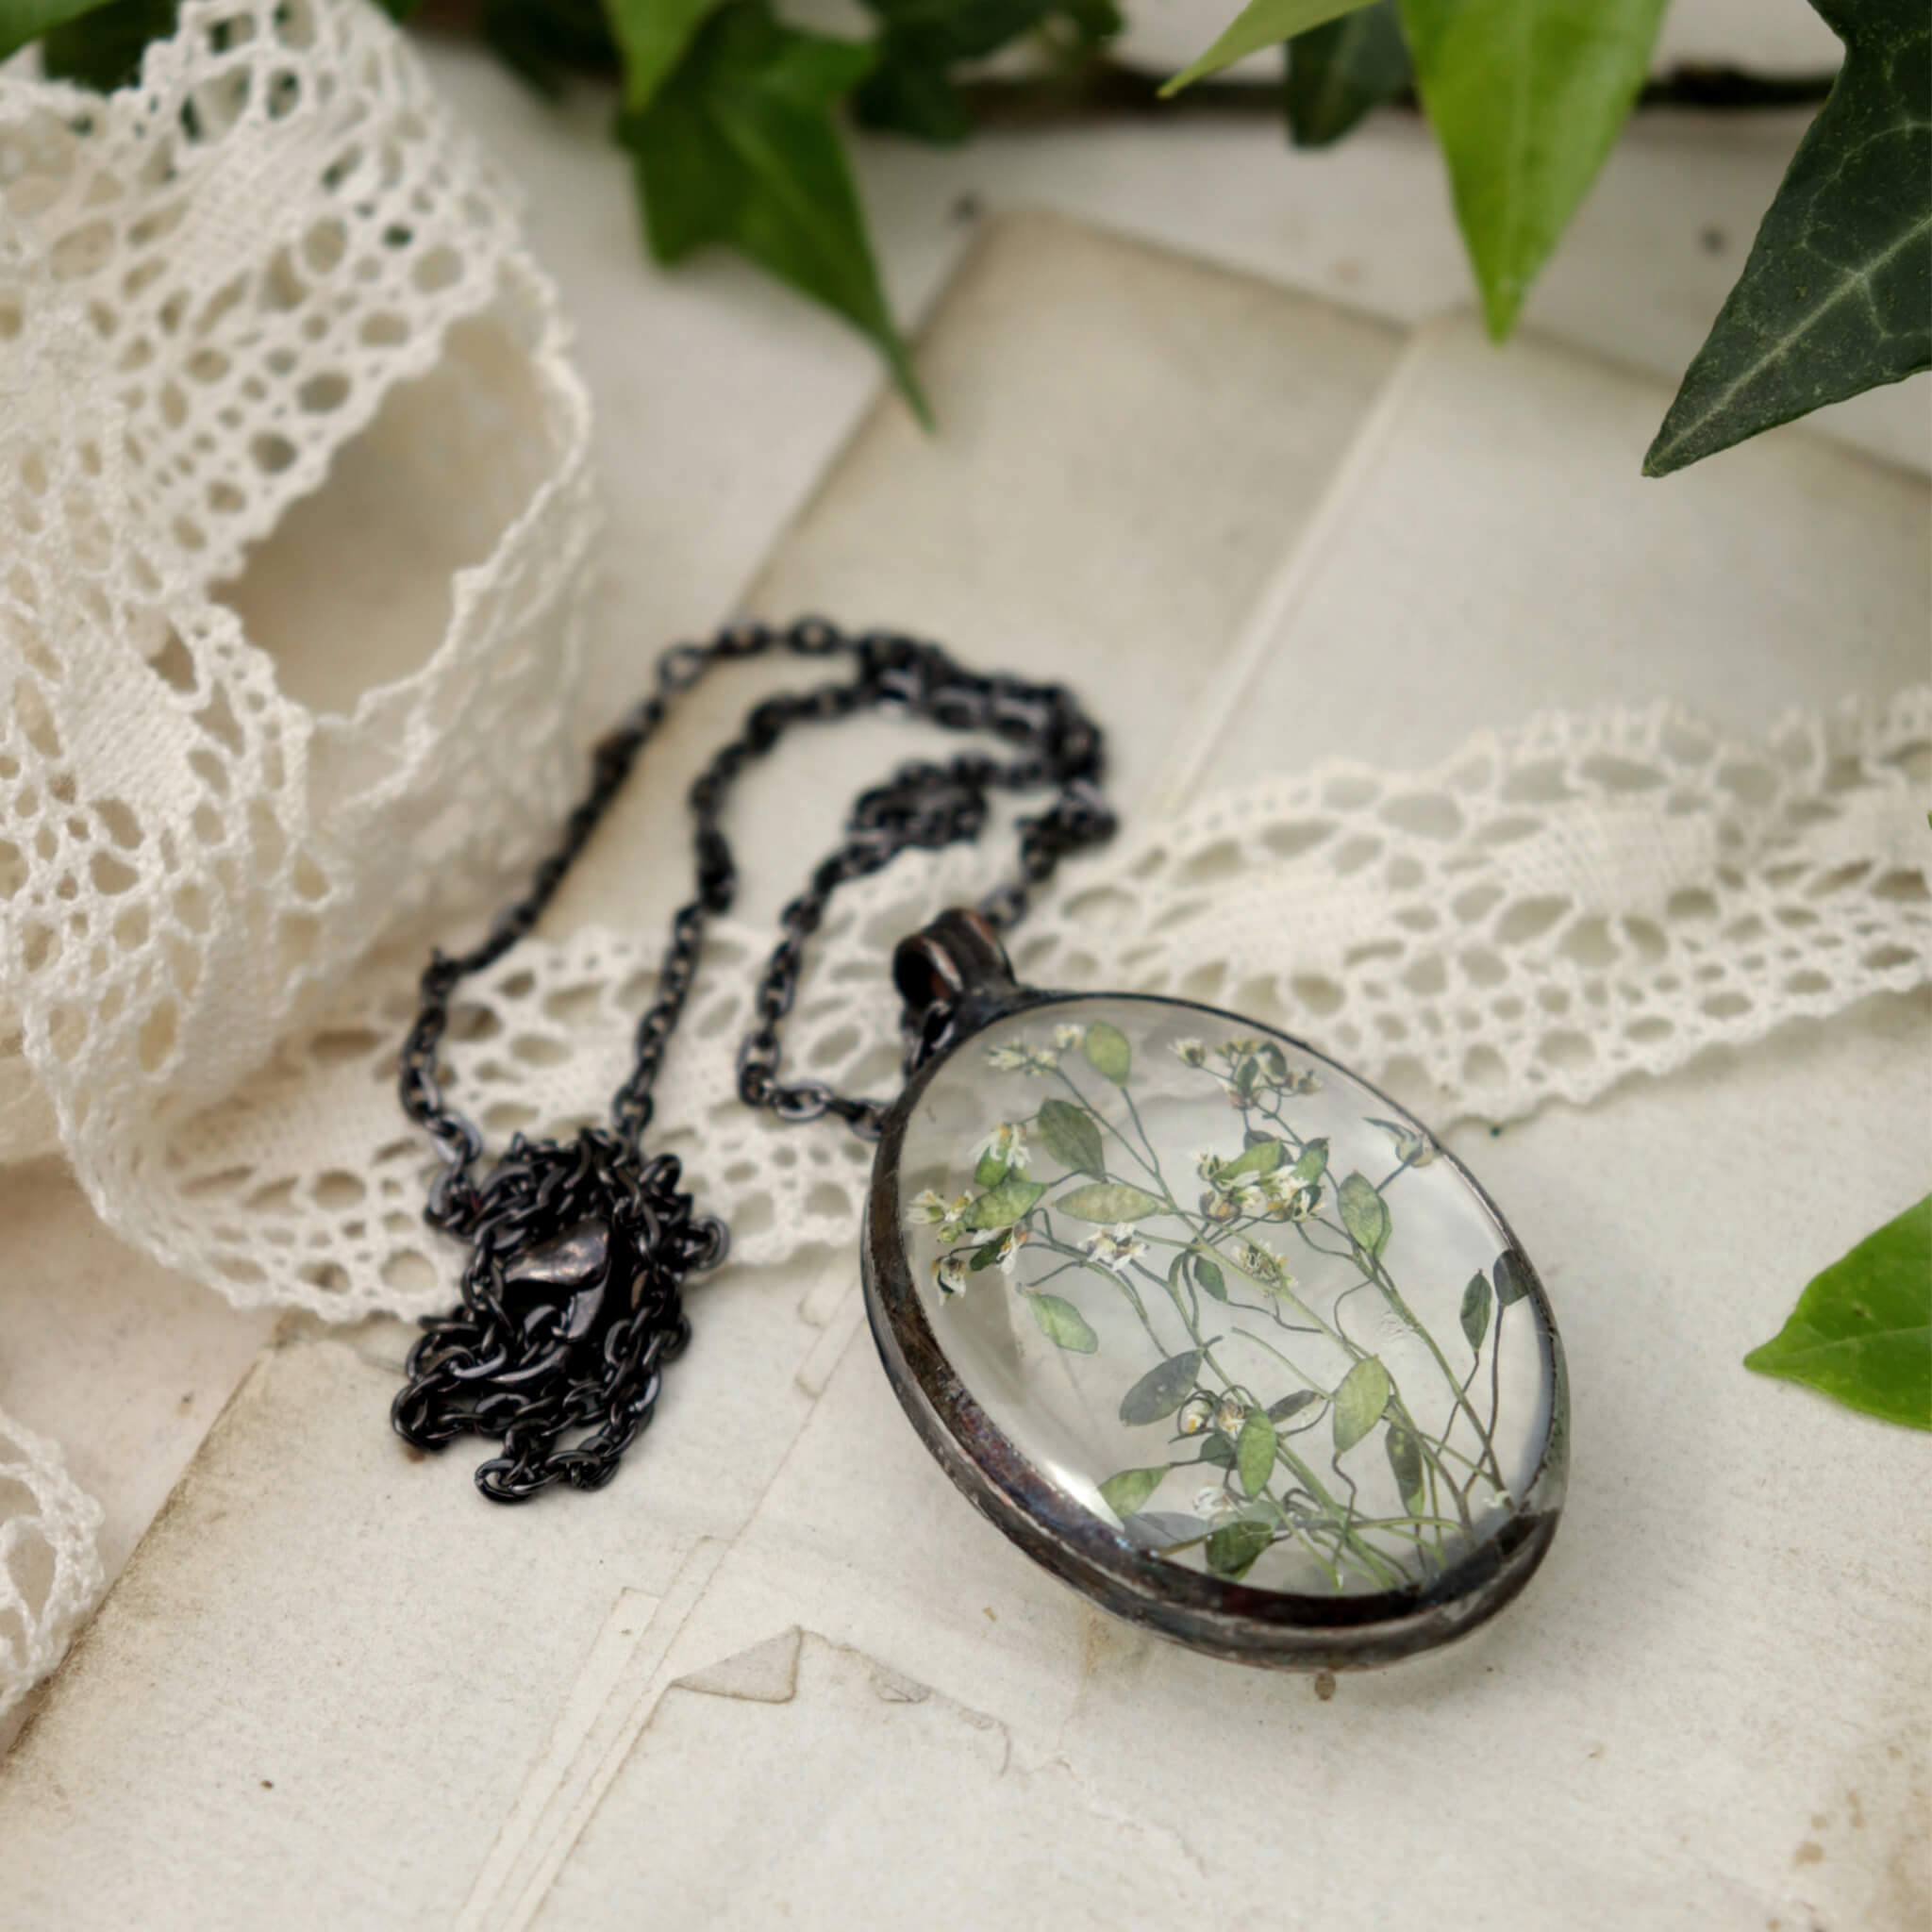  Big glass necklace with some flowers inside it on an old paper and lace